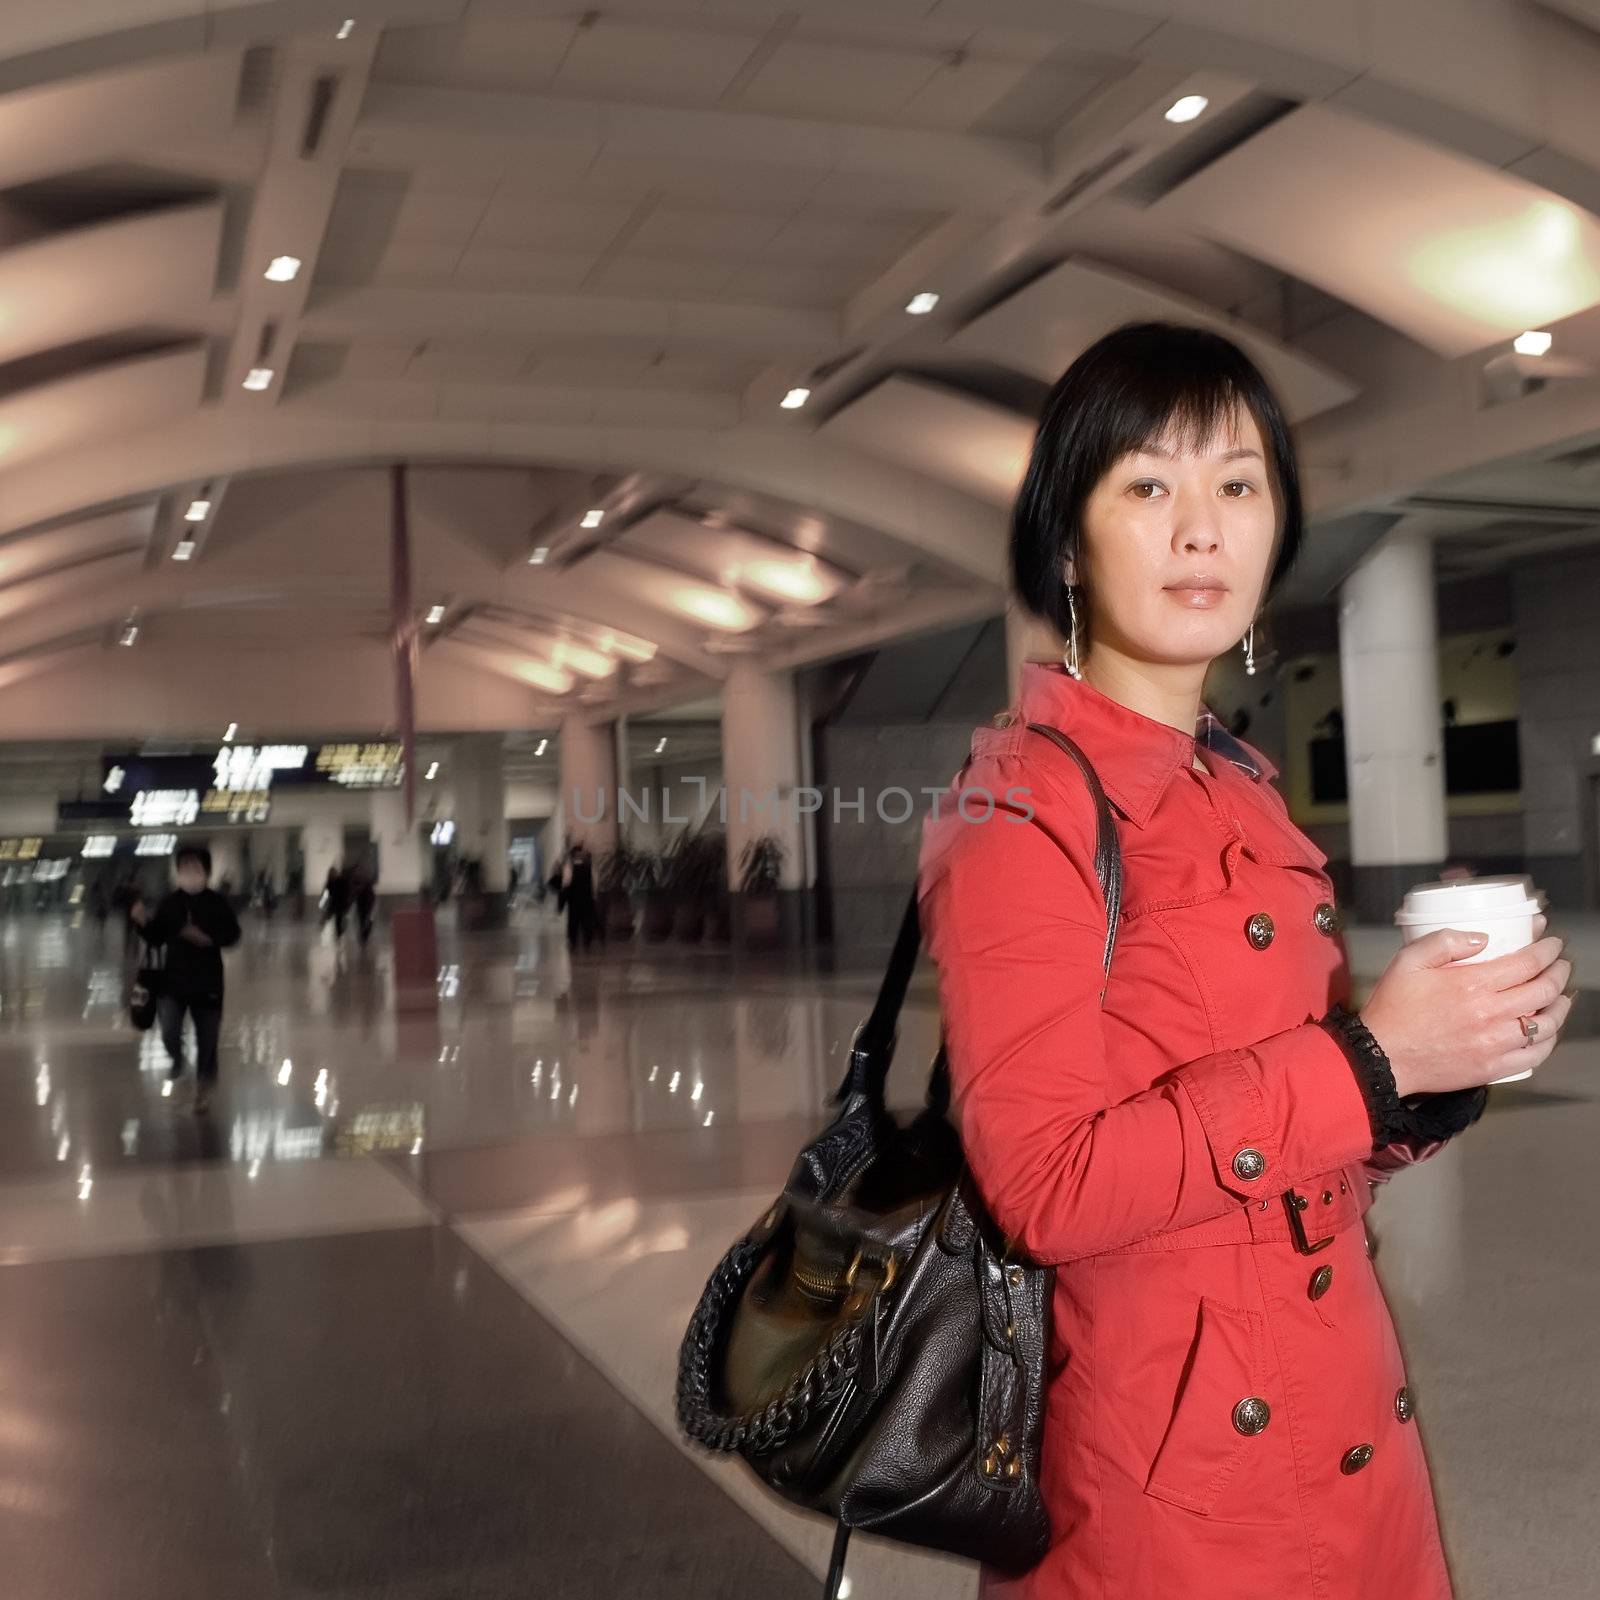 Asian woman holding cup of coffee, half length closeup portrait in modern public station.